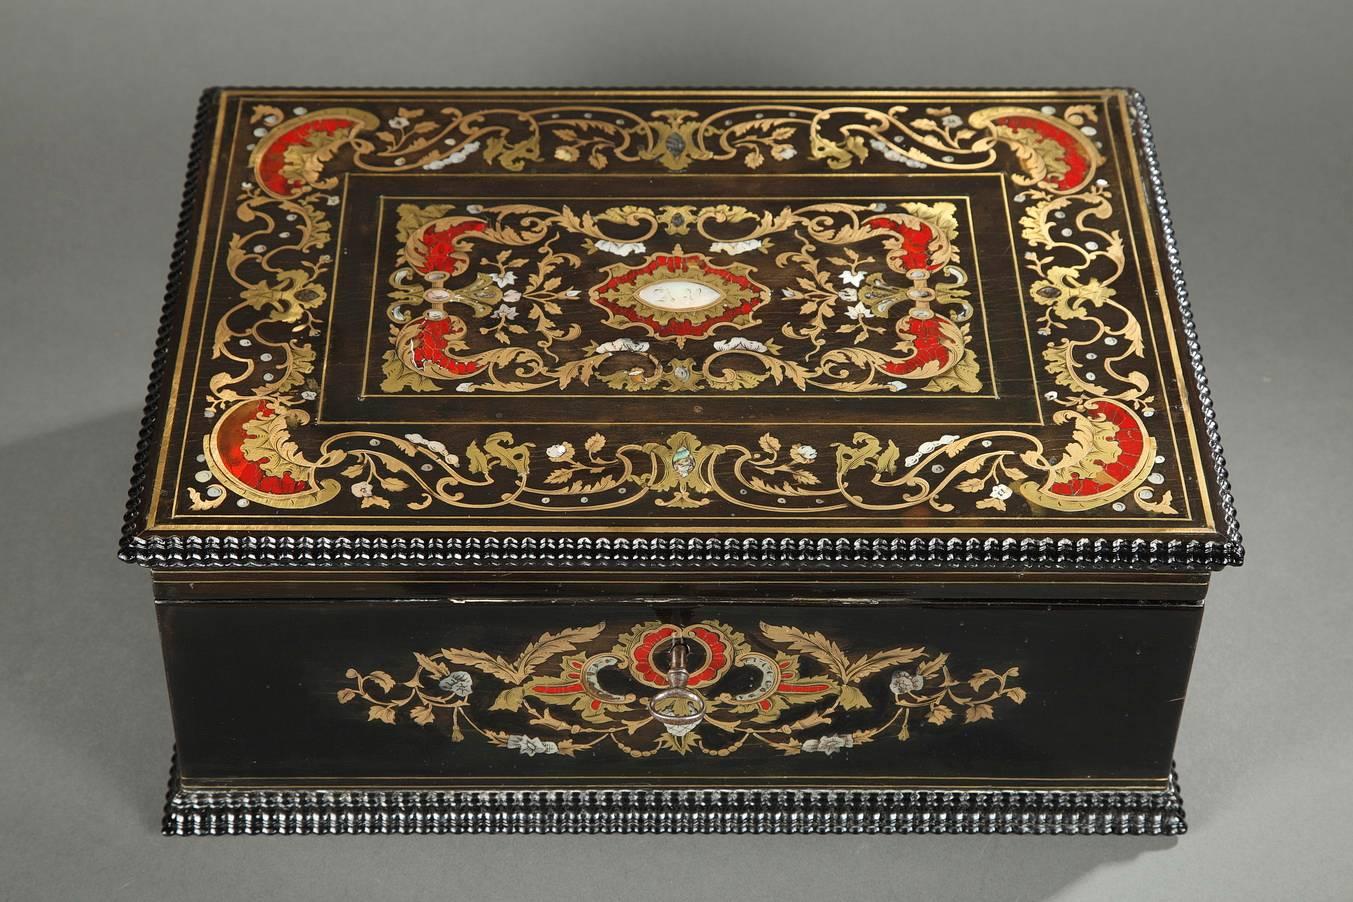 Sizeable rectangular, wooden coffer with its key. The blackened wood is inlaid with mother-of-pearl, tortoiseshell, and brass. The lid and the main face of the box are richly decorated with gilded rinceau, flowers, and scrolling vegetation. The